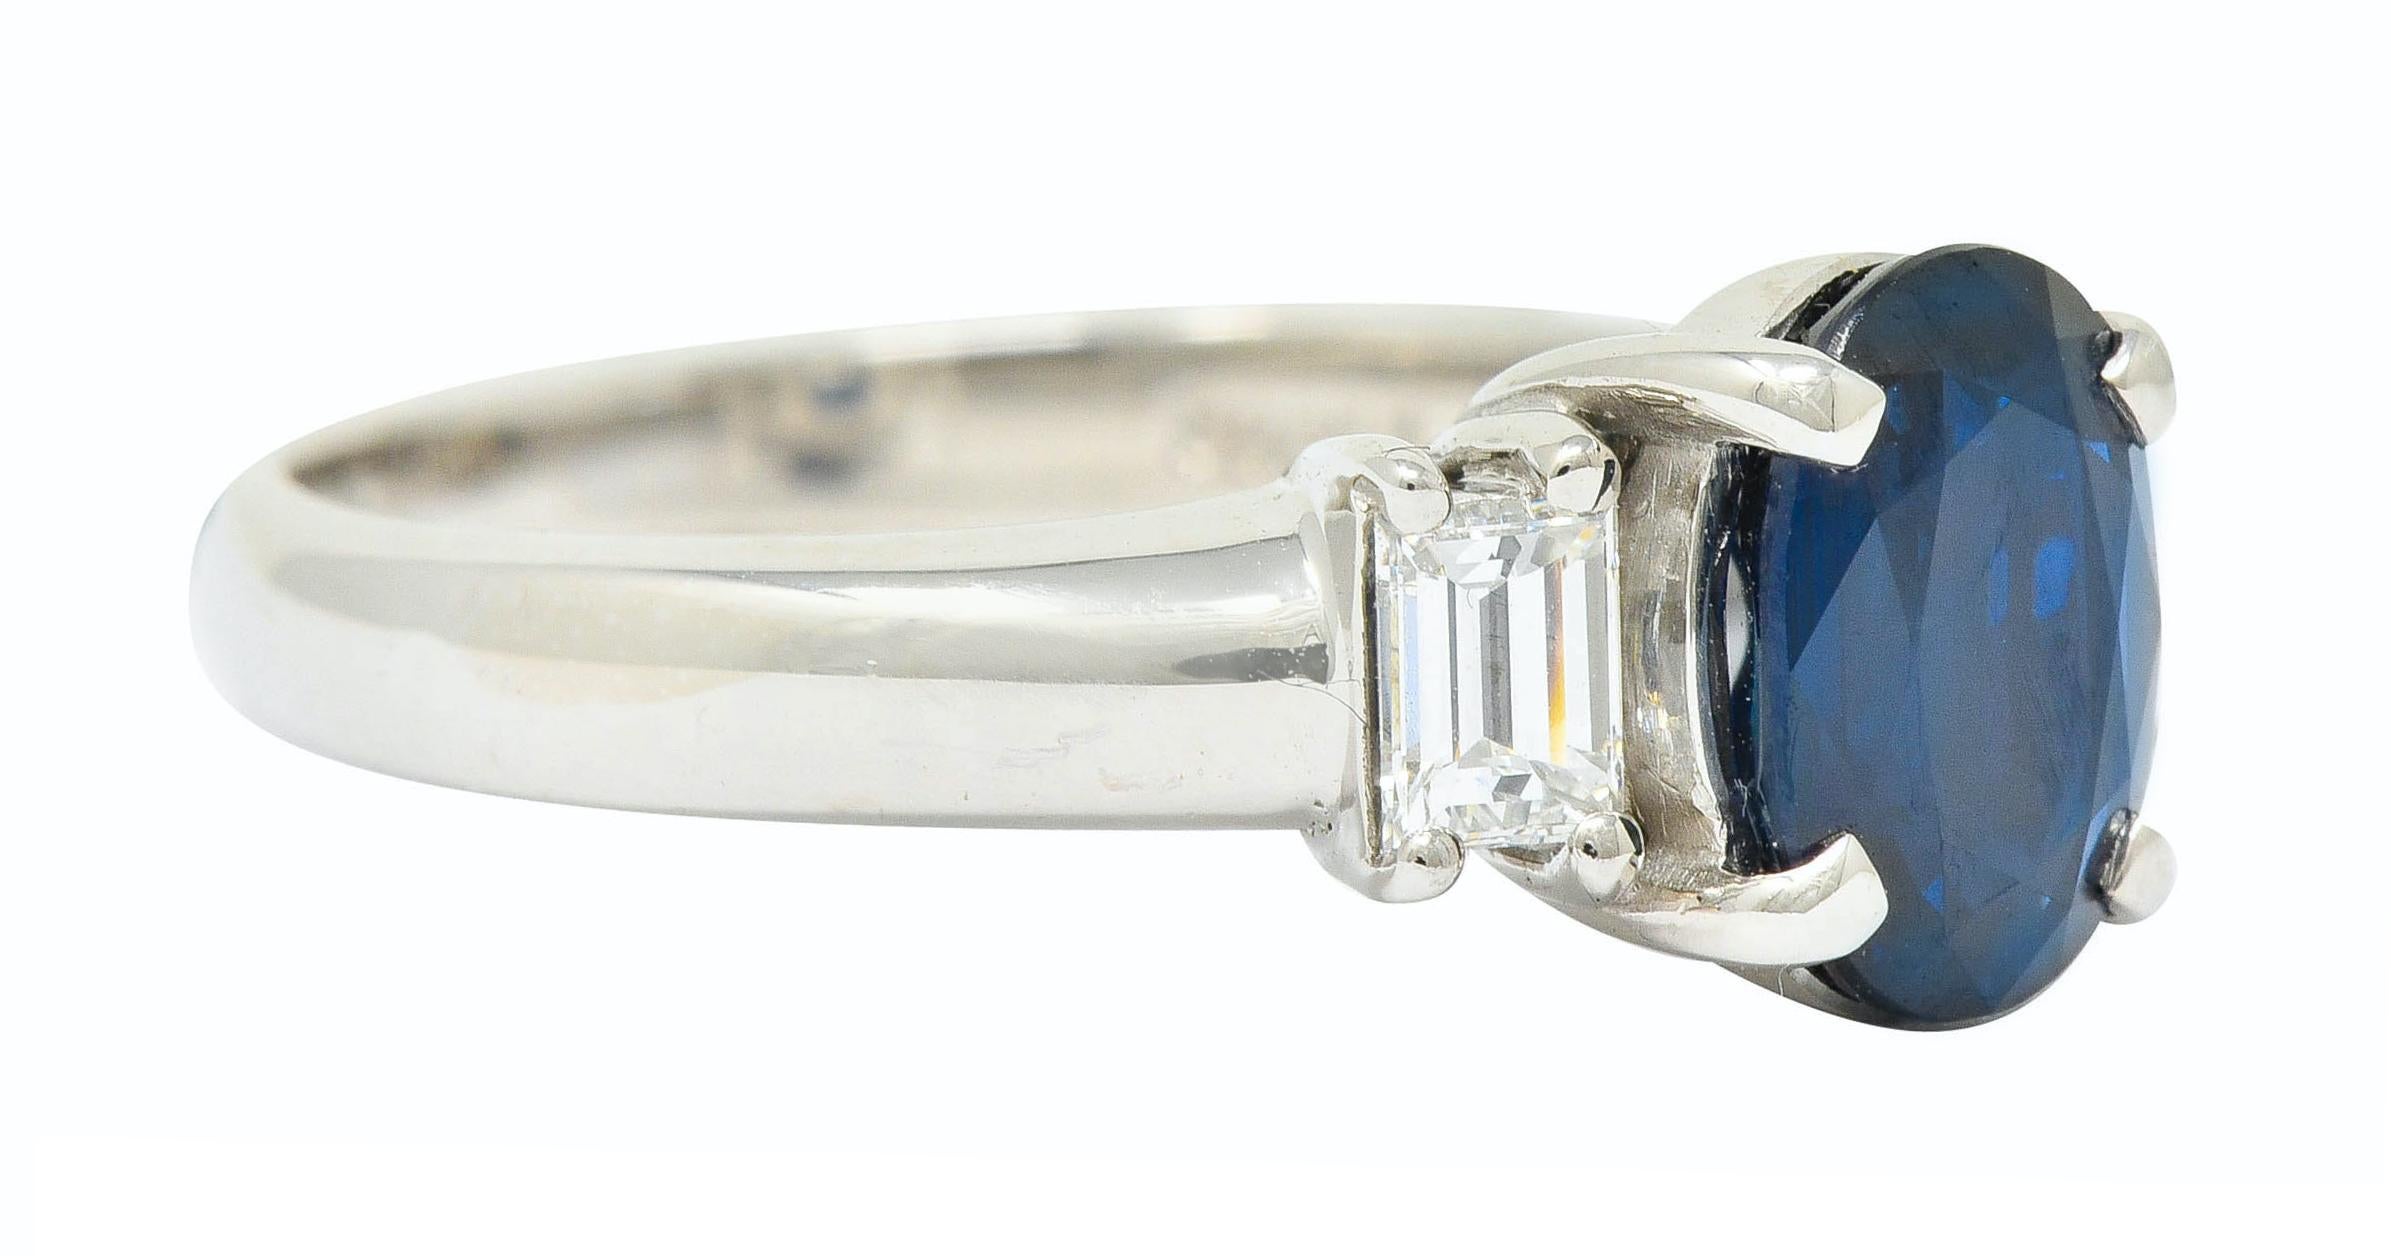 Centering an oval cut sapphire weighing 1.70 carat, transparent with dark blue color

Uniquely basket set and flanked by two baguette cut diamonds weighing 0.38 carat; G/H color with VS clarity

Stamped Pt900 for platinum

Stamped with stone